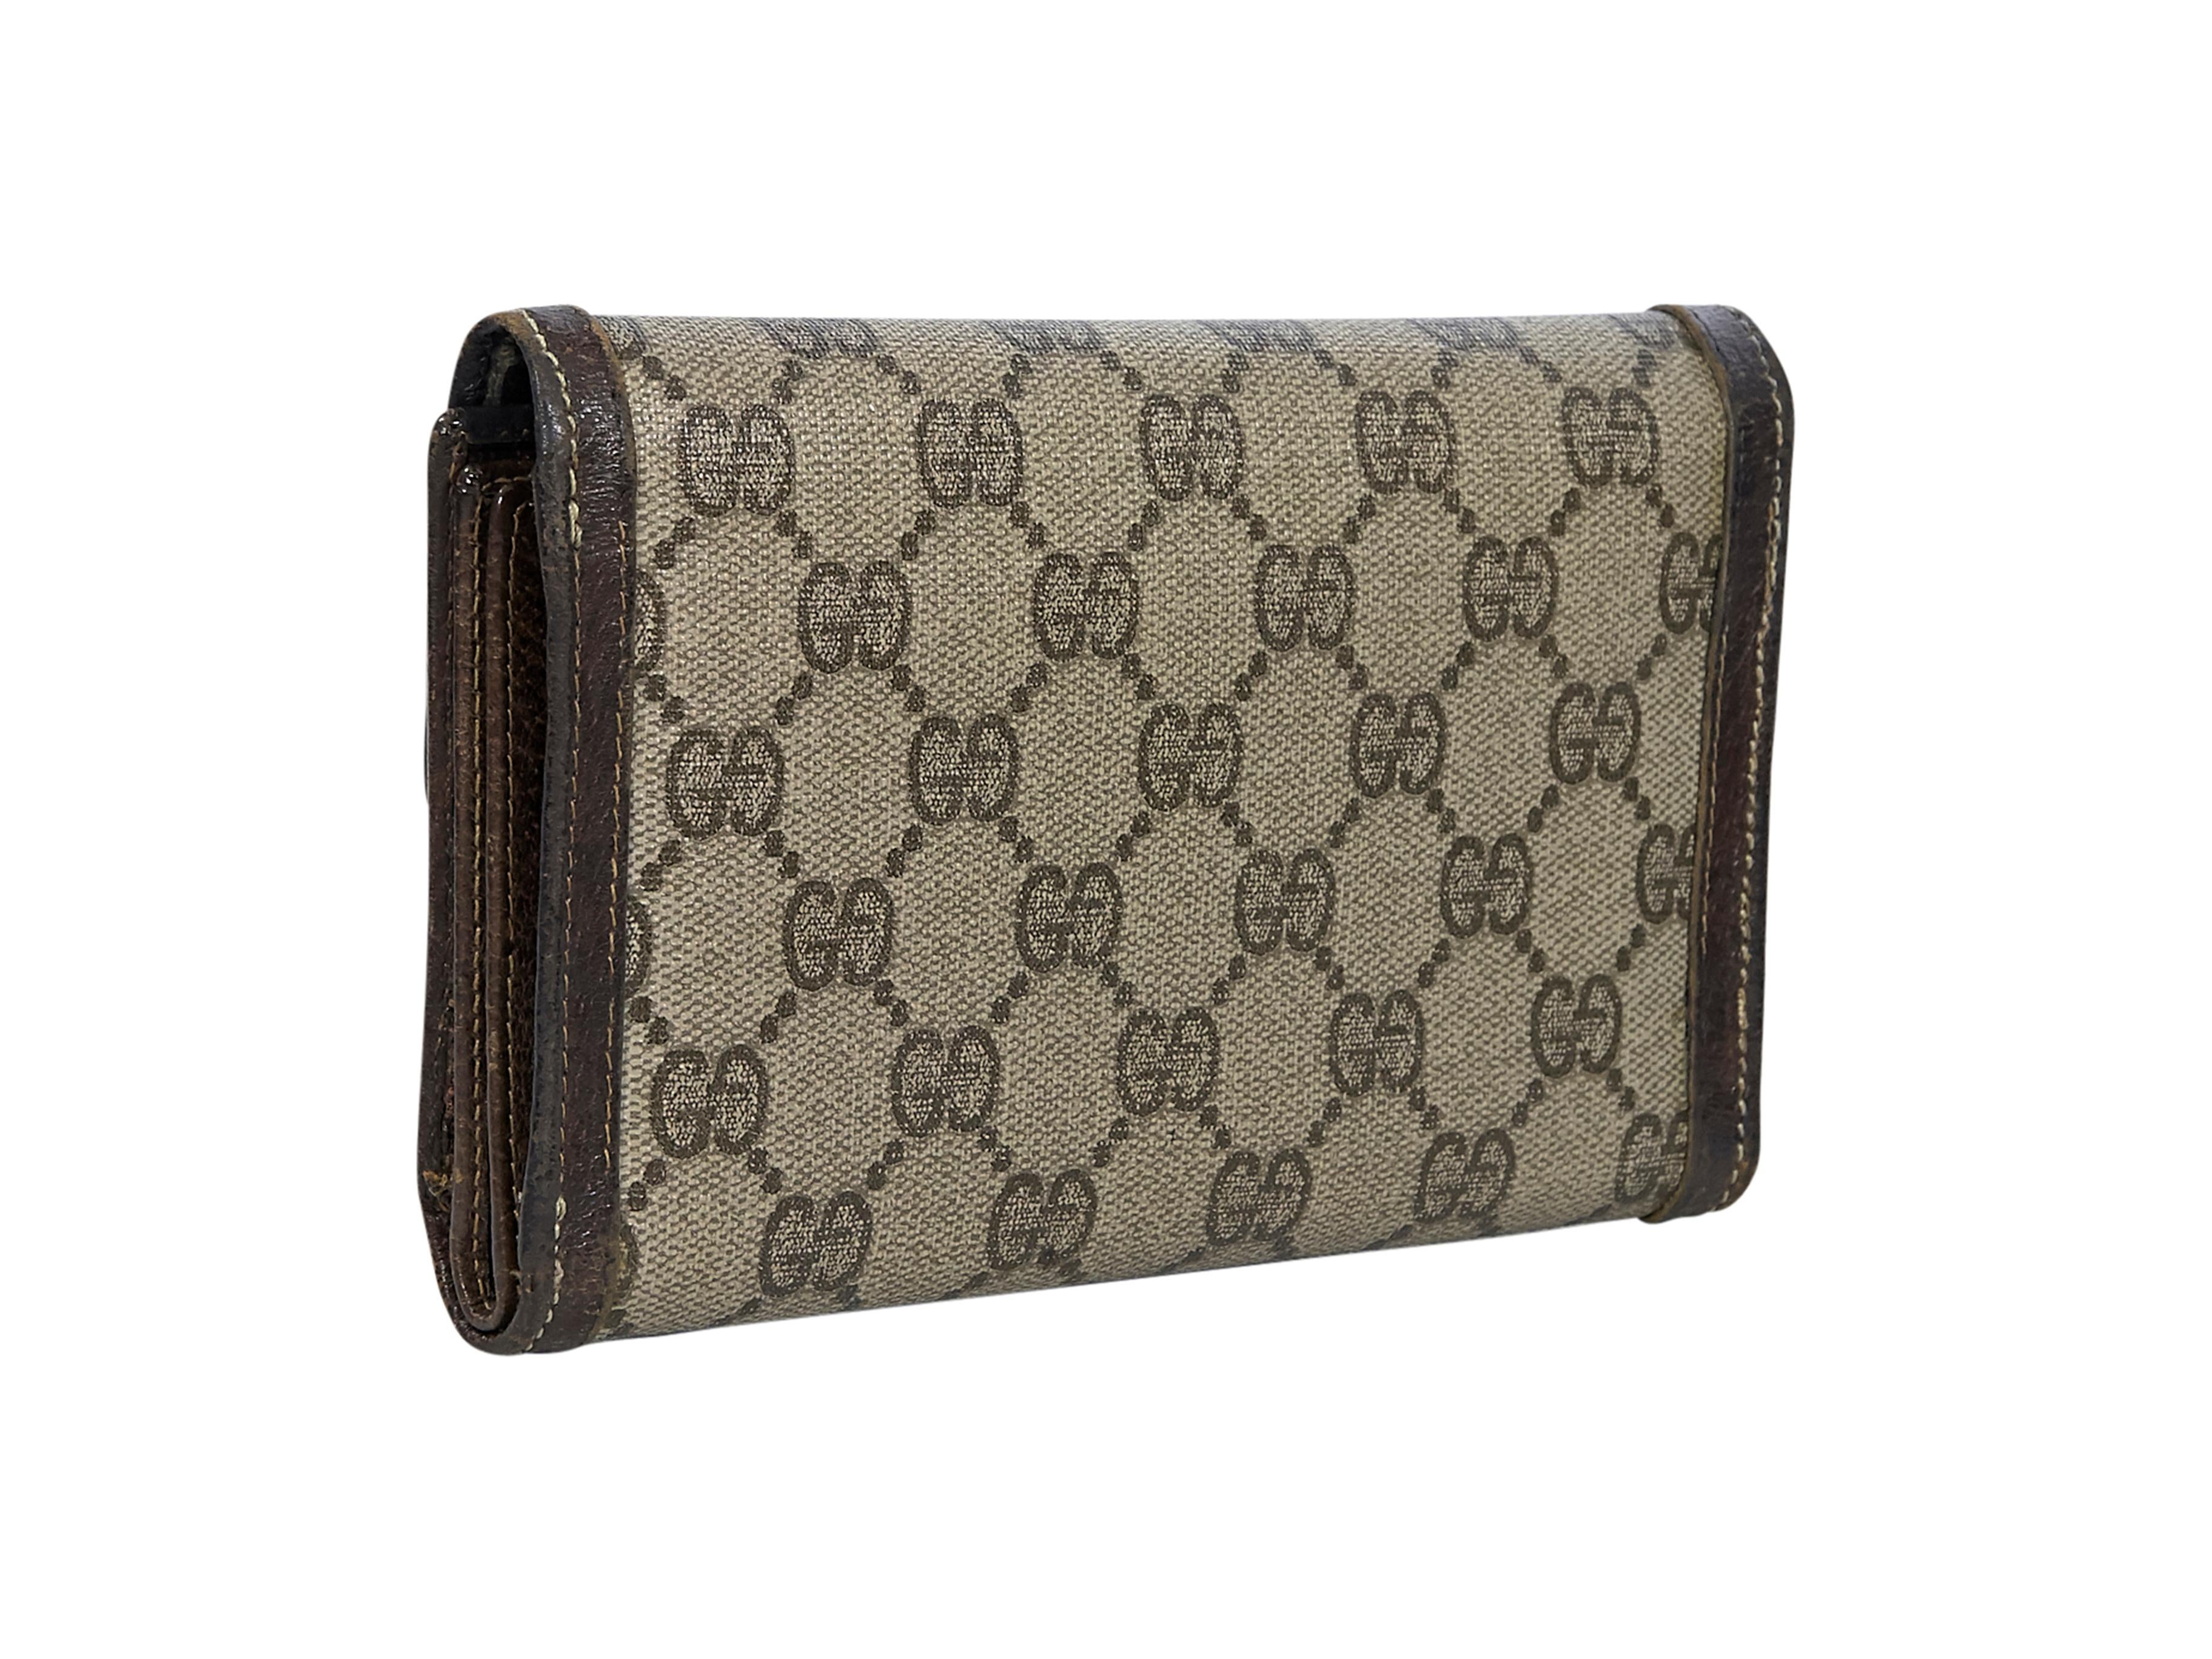 Product details:  Vintage brown canvas printed trifold wallet by Gucci.  Leather-trimmed. GG diamanté logo-patterned. Snap closure.  Lined interior with multiple credit card slots and ID slot. 6.75